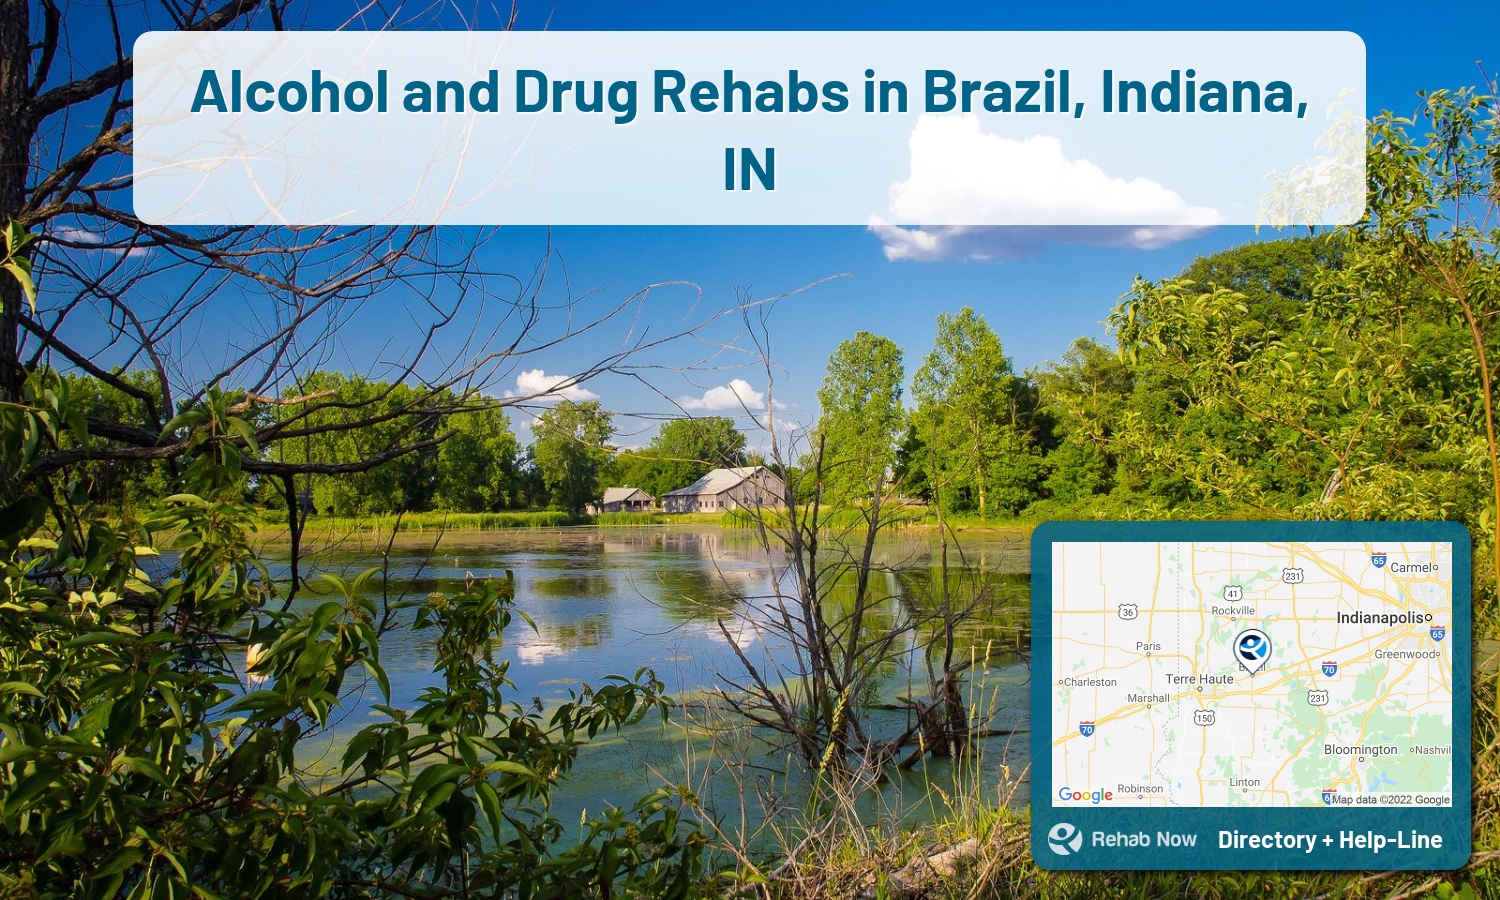 Find drug rehab and alcohol treatment services in Brazil. Our experts help you find a center in Brazil, Indiana